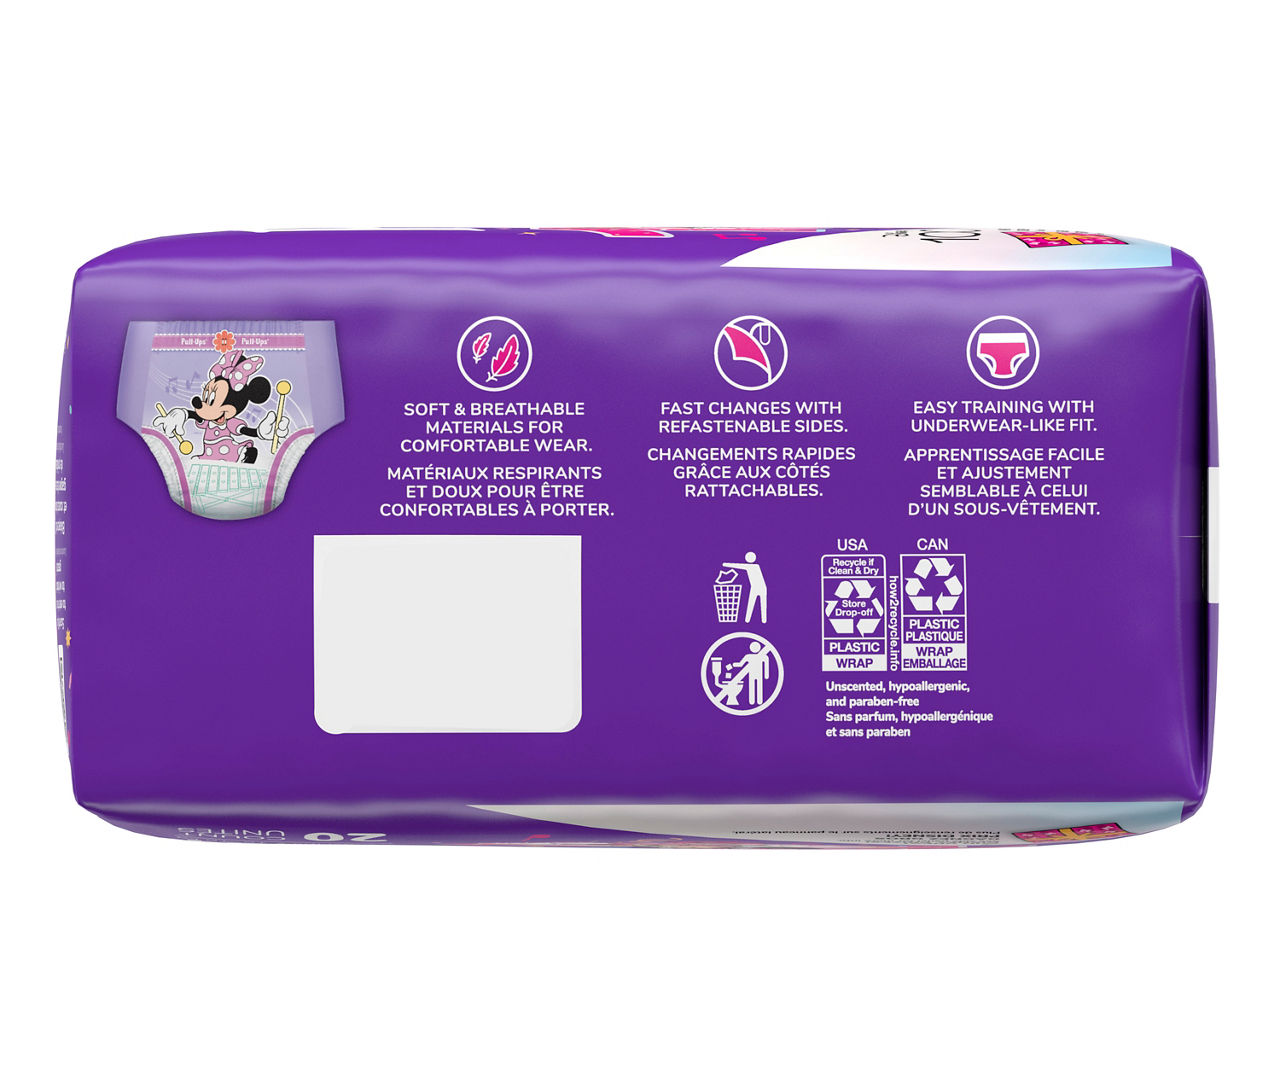 HUGGIES PULL-UPS GIRLS Disney Minnie Mouse, 4T - 5T 33 COUNT EACH